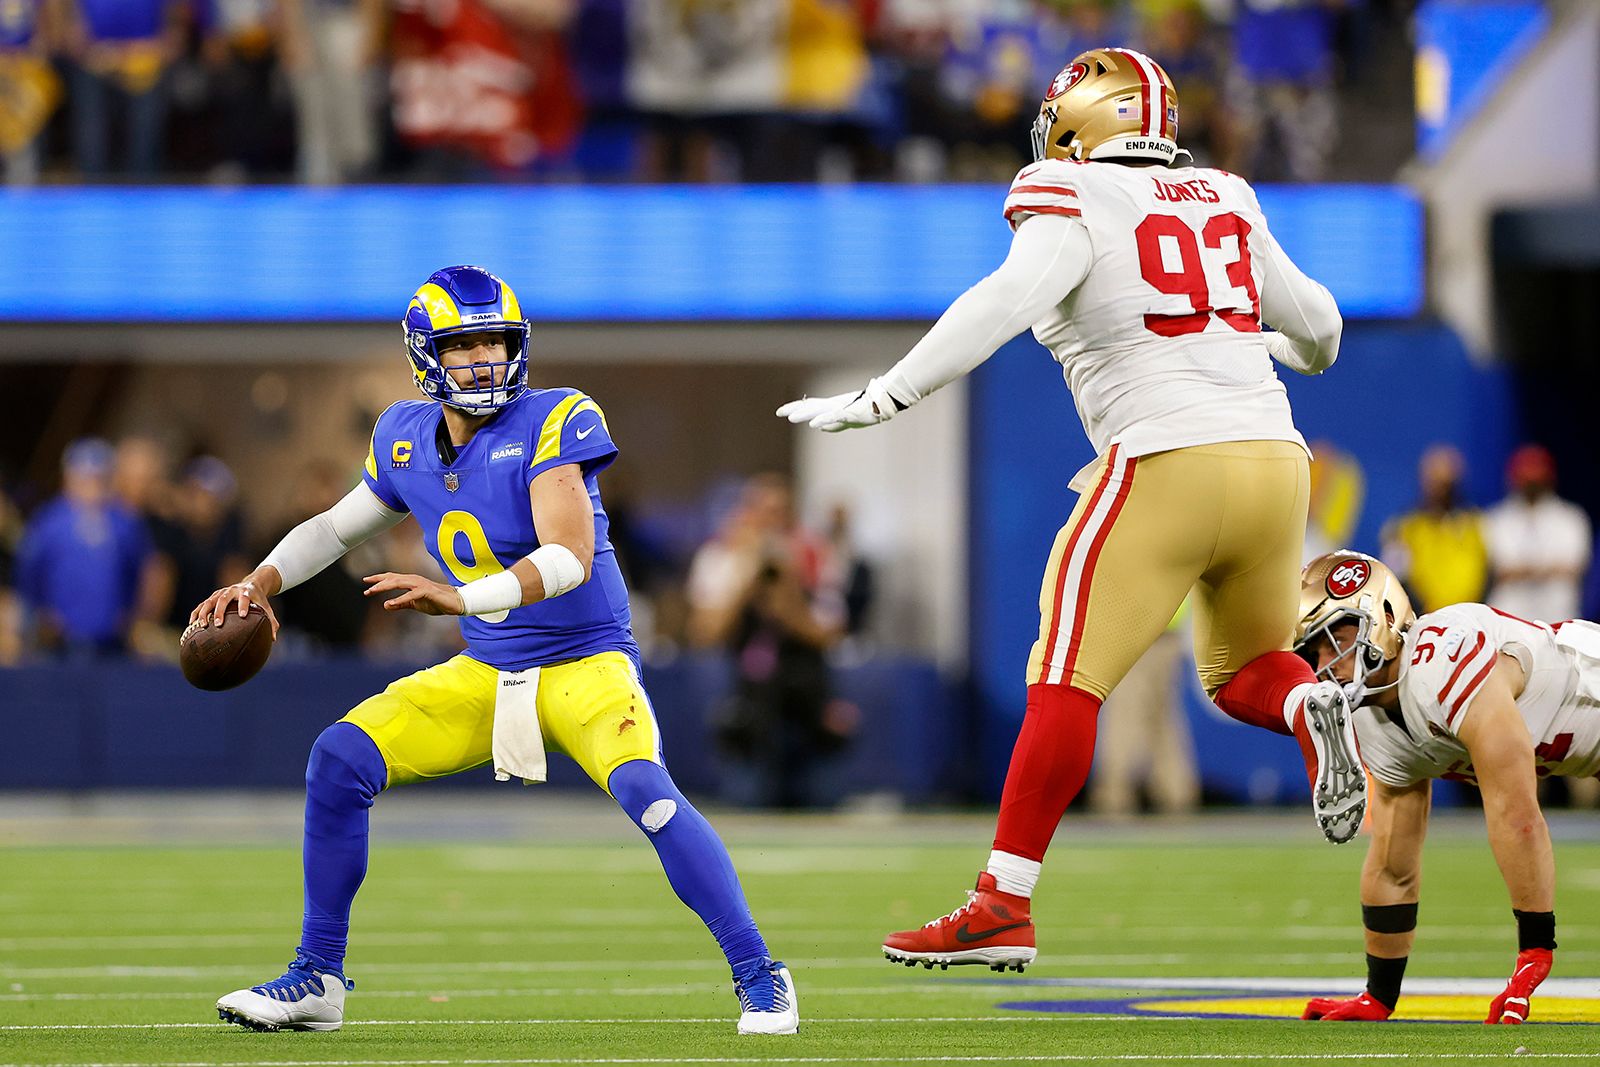 TV Ratings: Rams-49ers NFC Championship Scores 50 Million Viewers